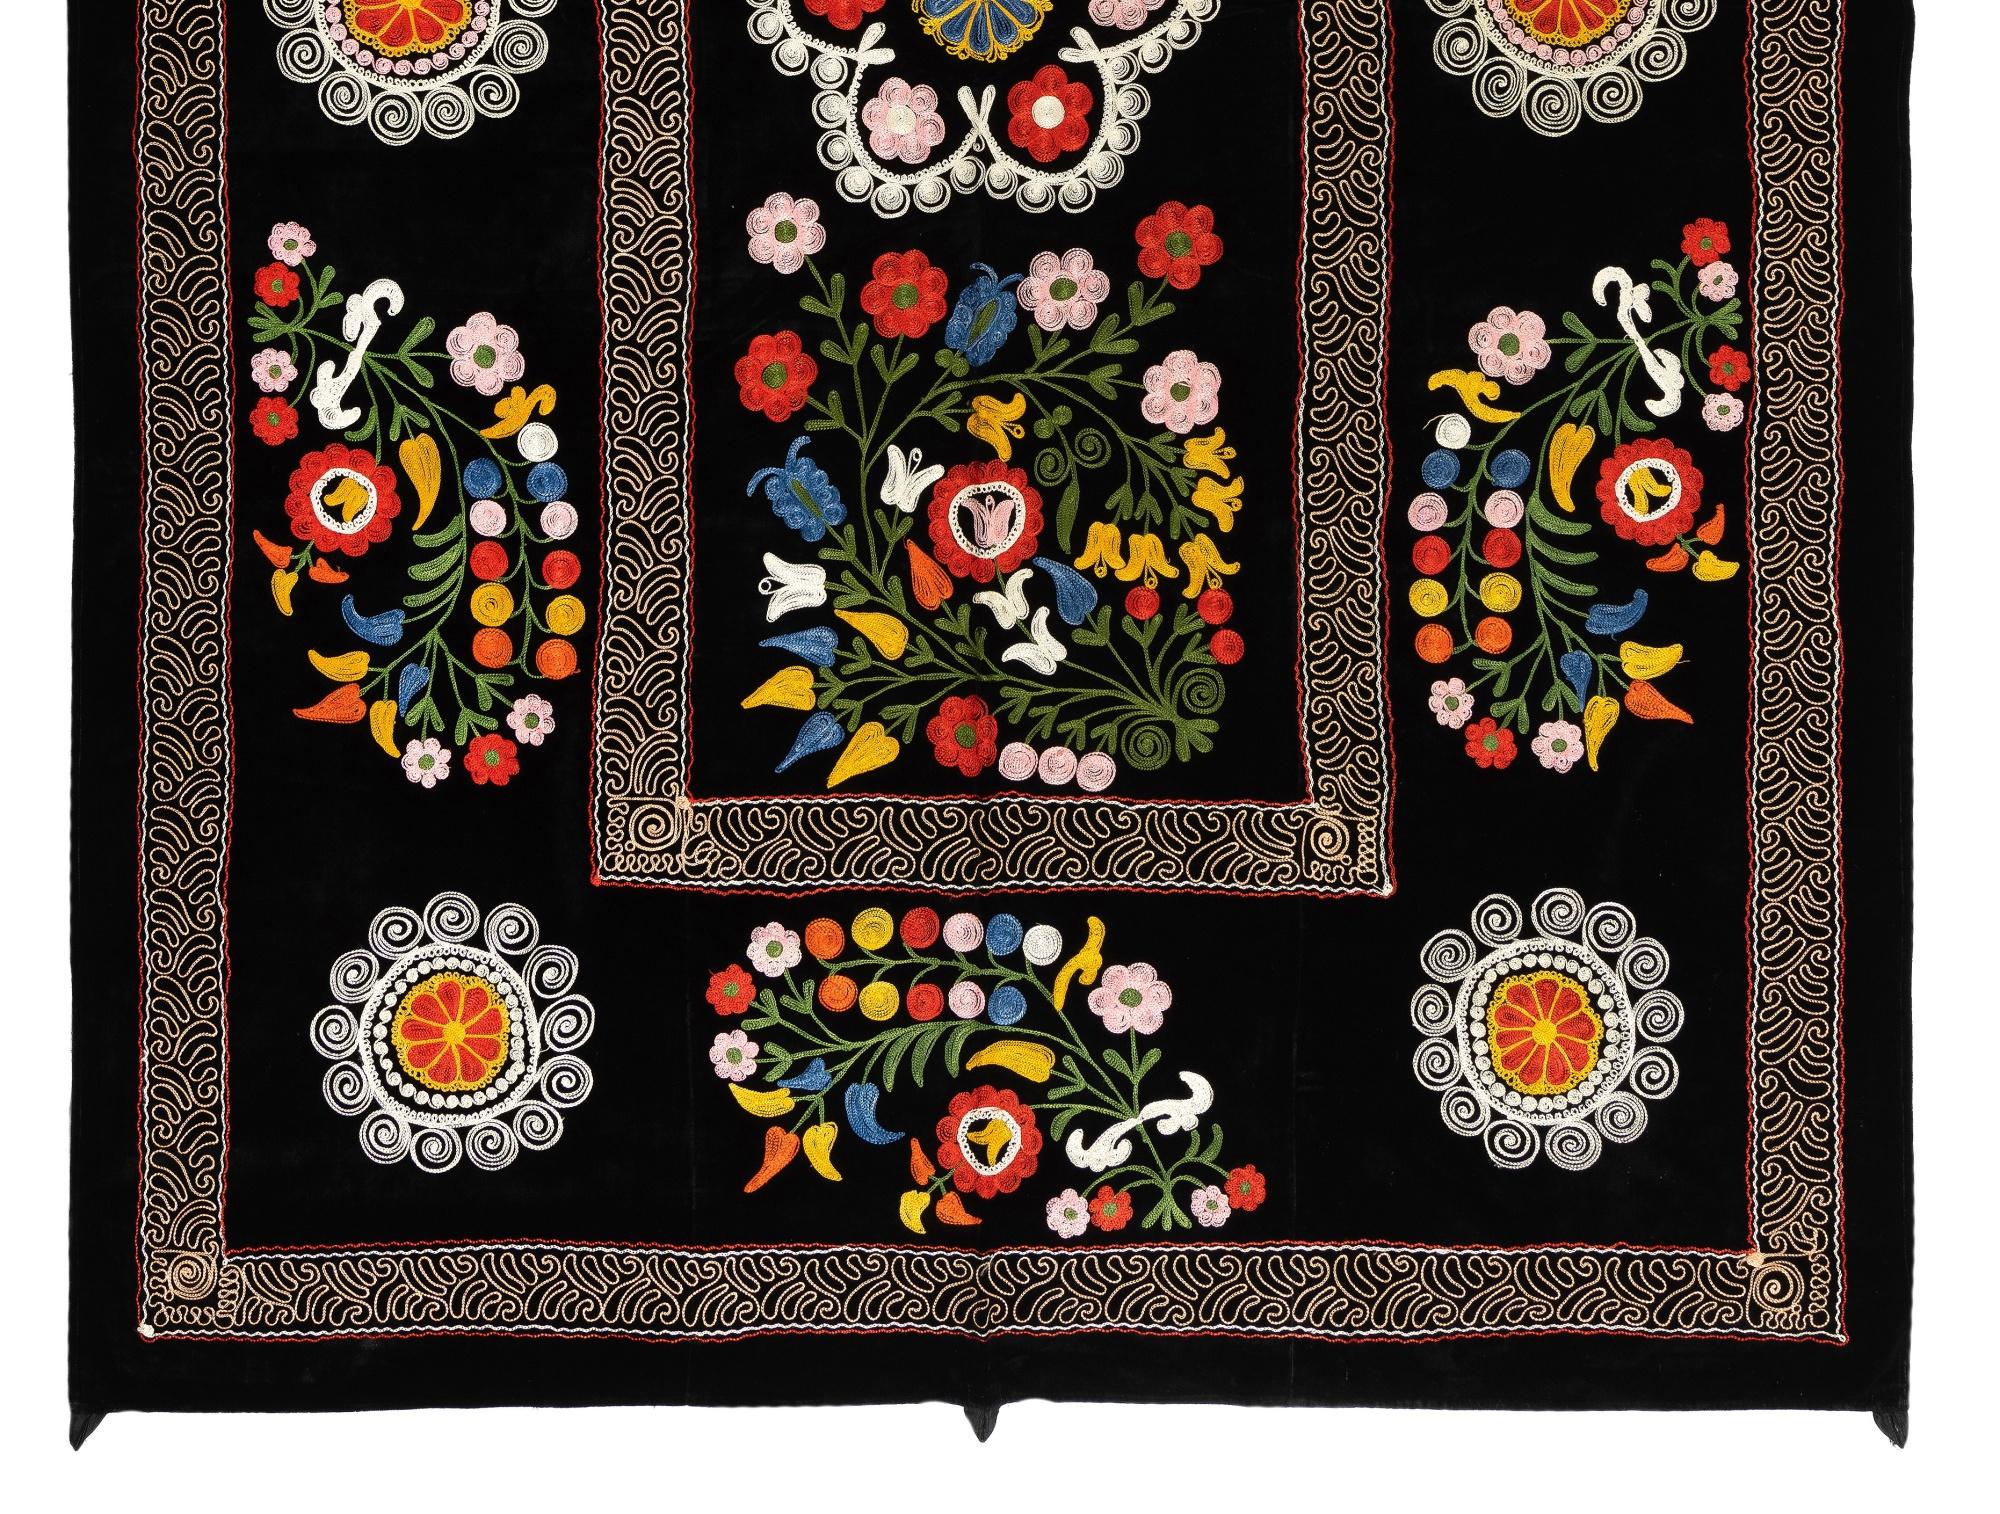 Uzbek 4.4x6.7 Ft Silk Embroidered Suzani Bed Cover, Floral Pattern Black Wall Hanging For Sale